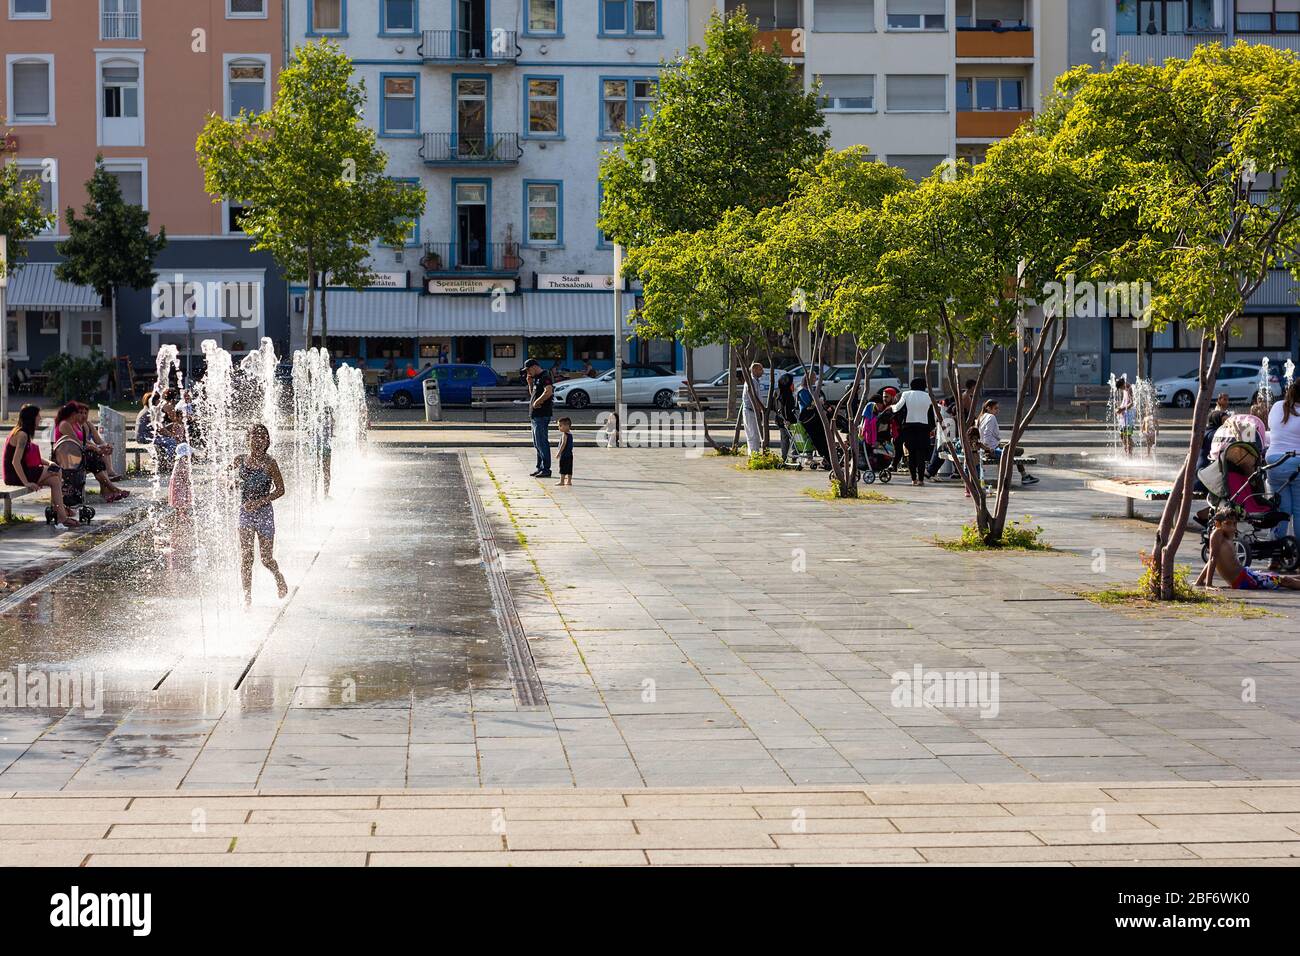 Children play in in water fountain jets with locals relaxing on benches in a public area, Alter Messplatz, Mannheim, Germany. Stock Photo